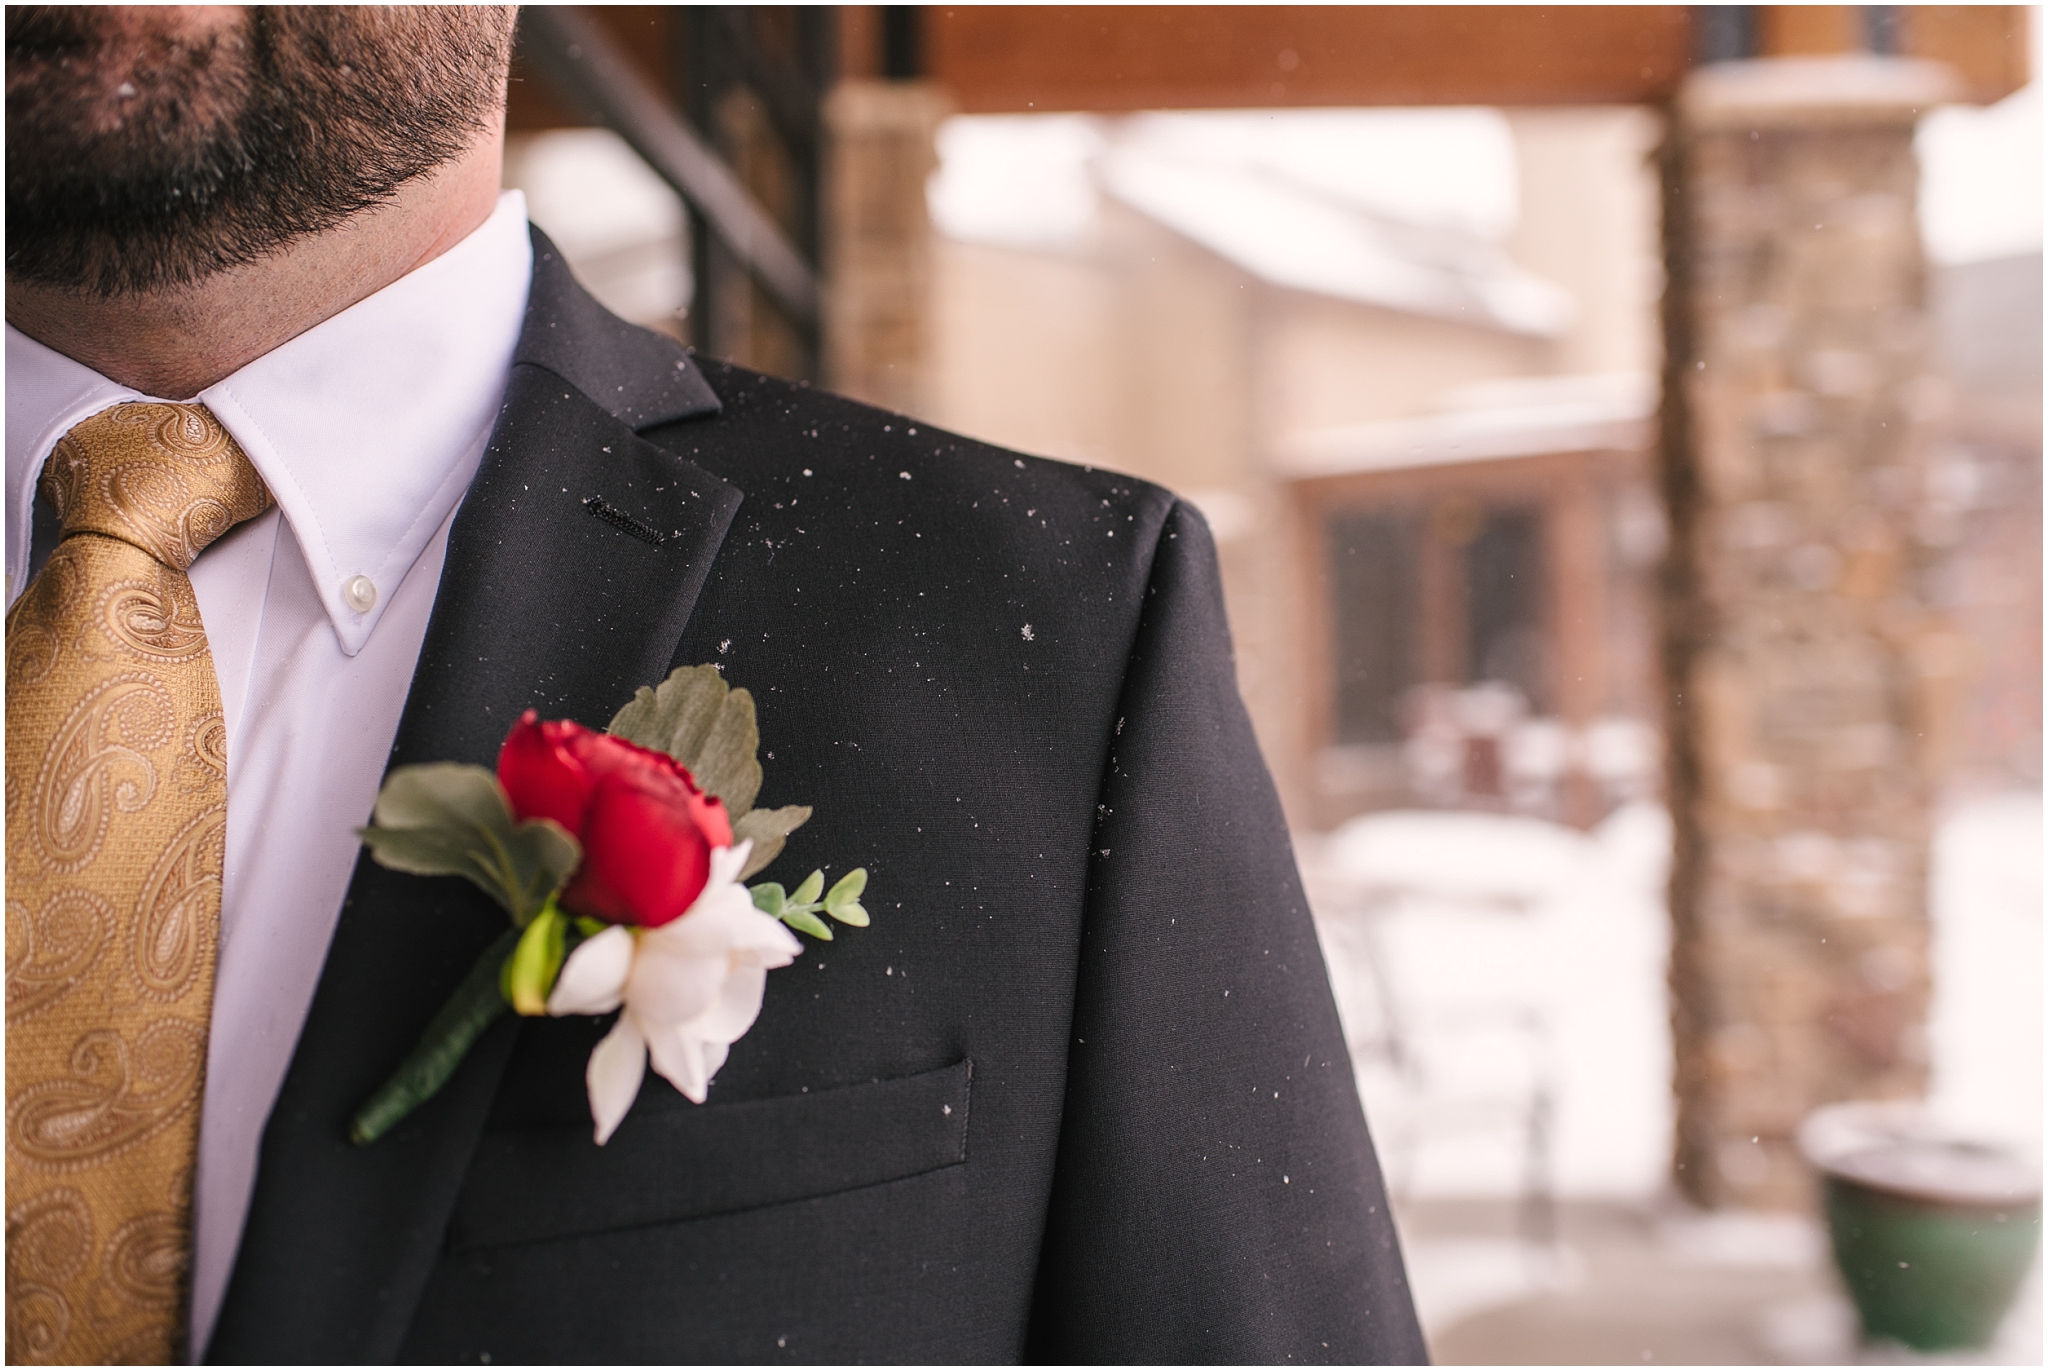 Groom's silk boutonniere for winter wedding at St Francis of Assisi Catholic Church